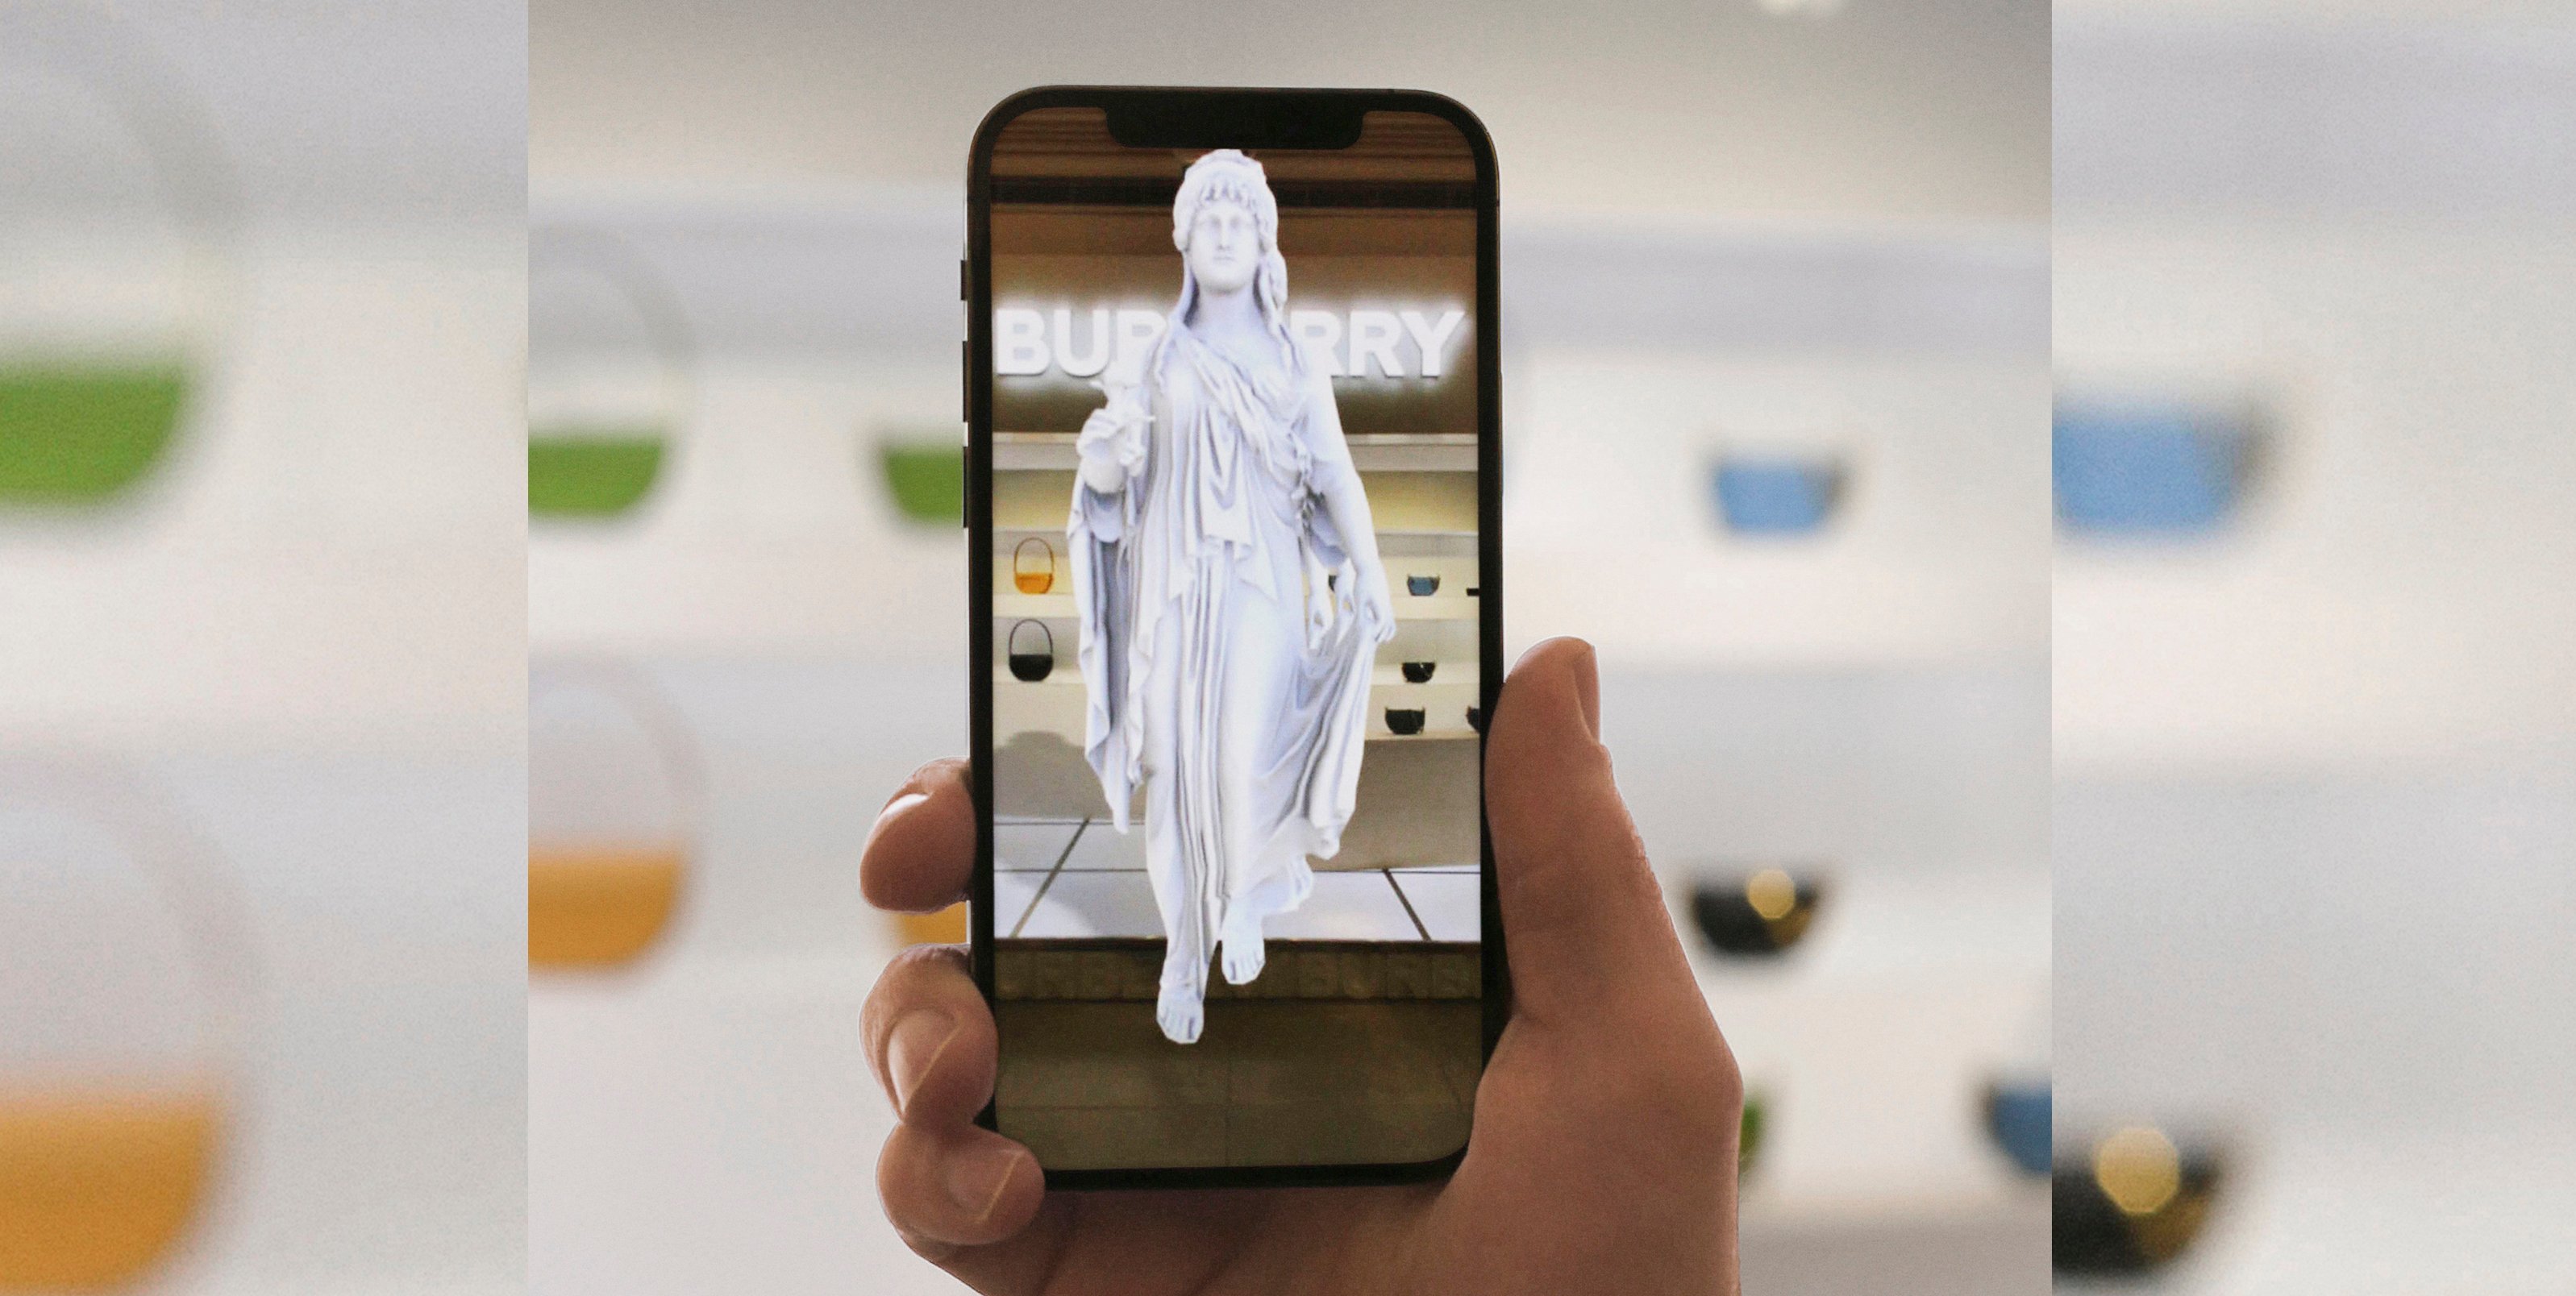 Burberry invites customers into the World of Olympia with its latest augmented reality experience